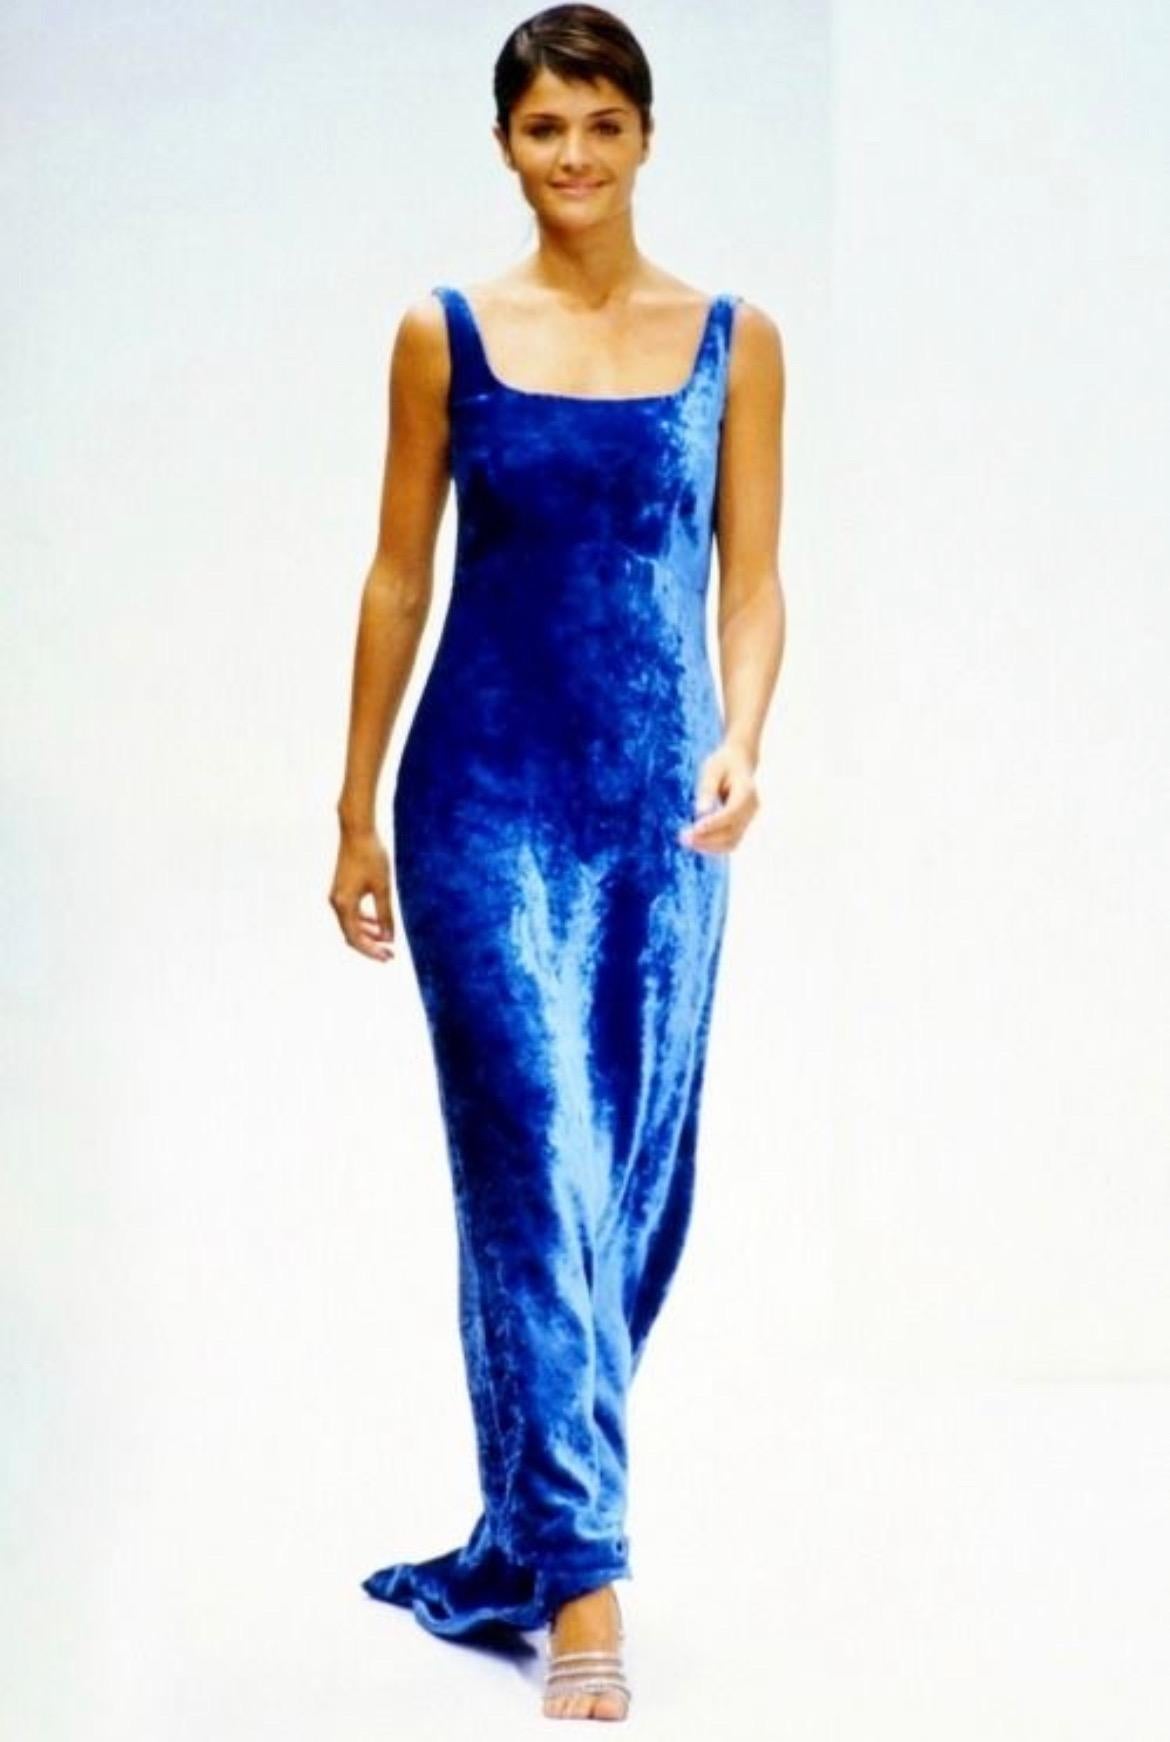 Presenting a gorgeous brown velvet Dolce and Gabbana gown. From the Fall/Winter 1994 collection, the blue version of this fabulous gown debuted on the season's runway modeled by Helena Christensen. This effortlessly chic dress features a wide scoop